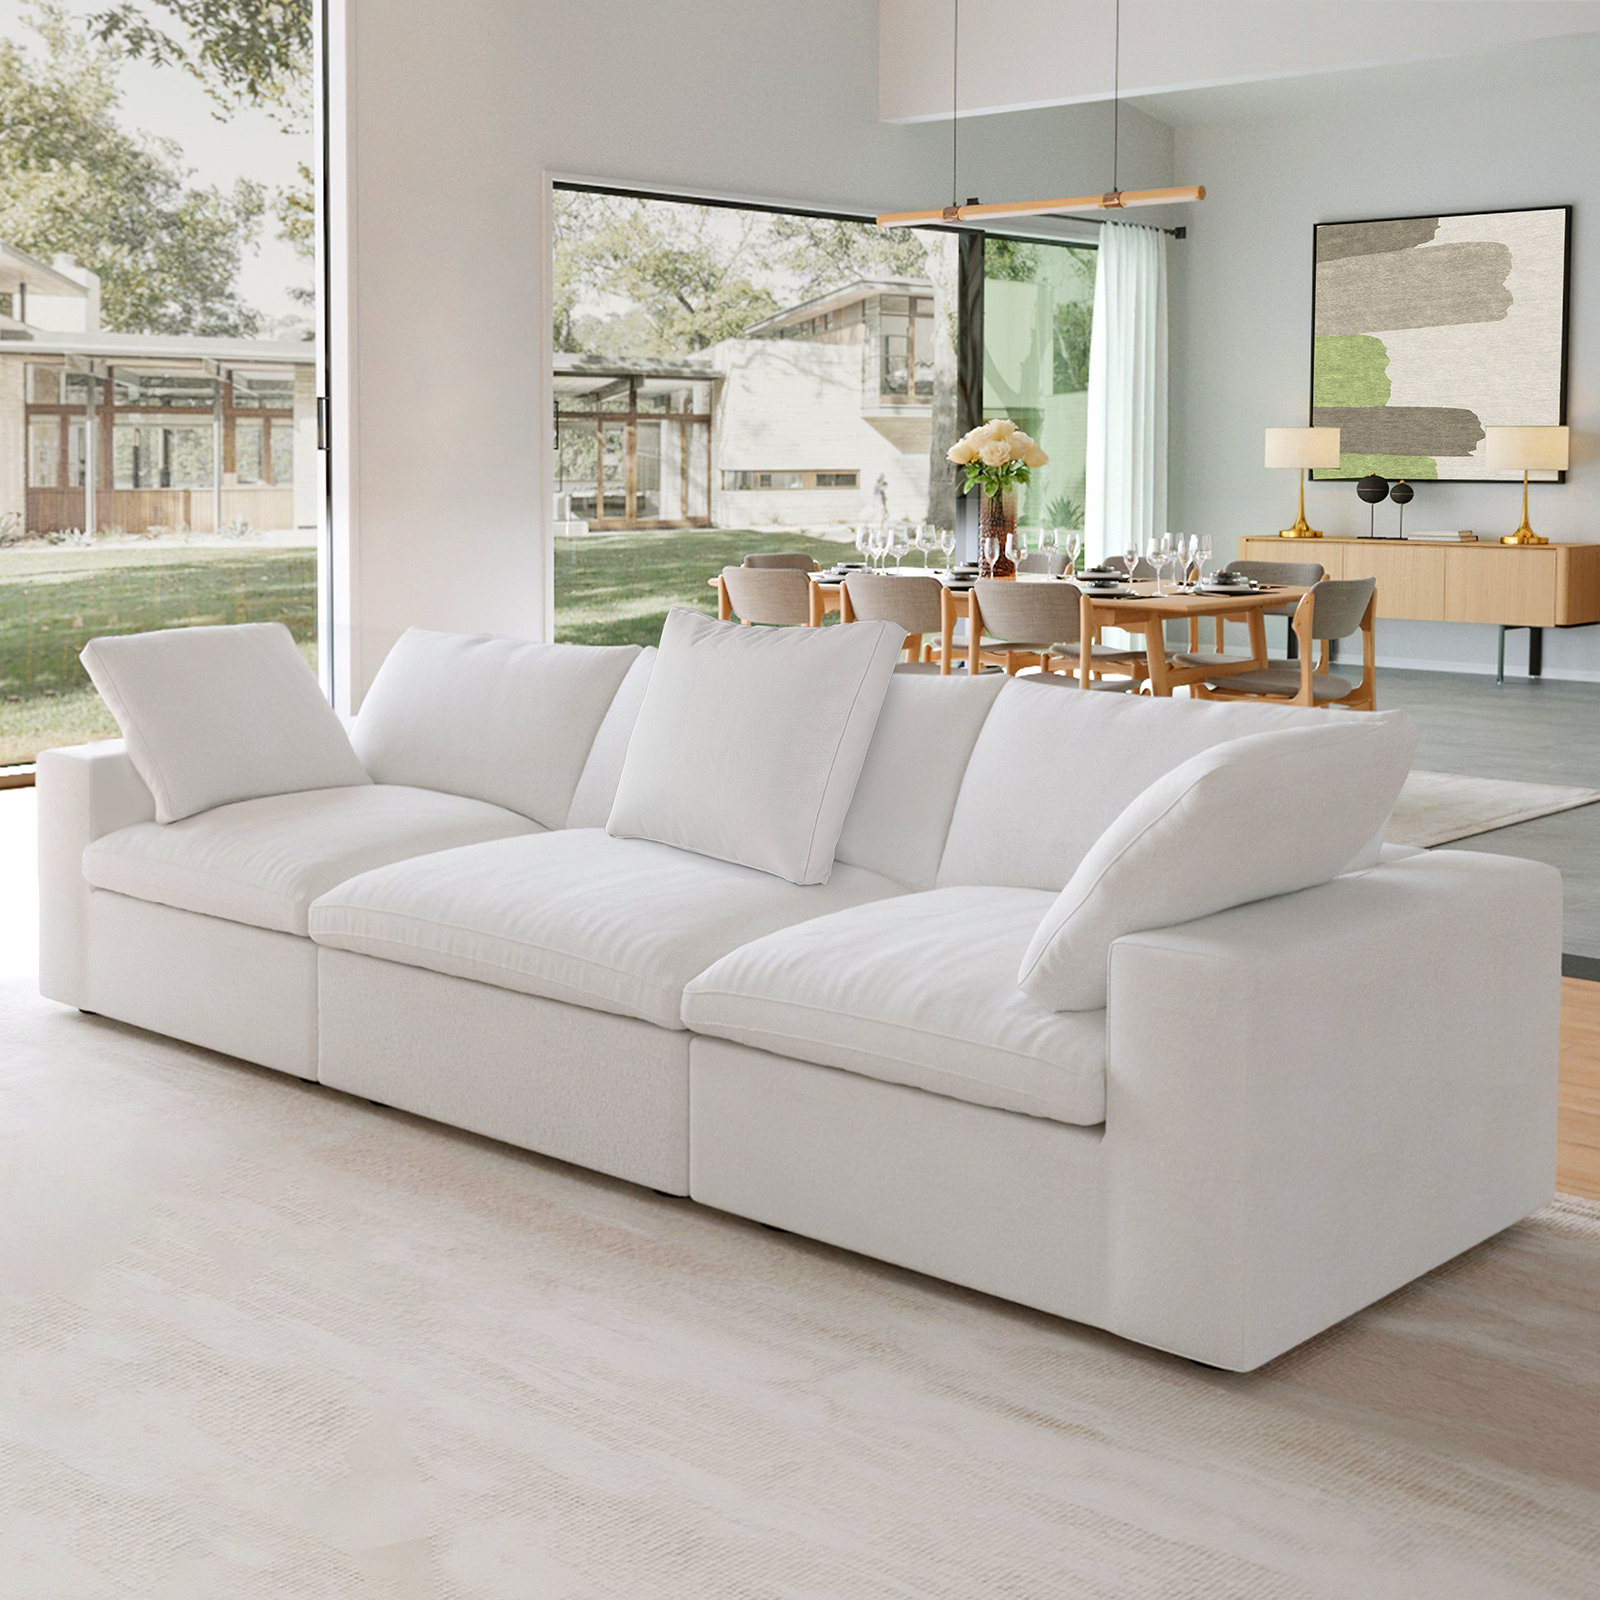 Modular Sectional Sofa Cloud Couch For Living Room, Down Filled Comfy Cloud  Puff Modern